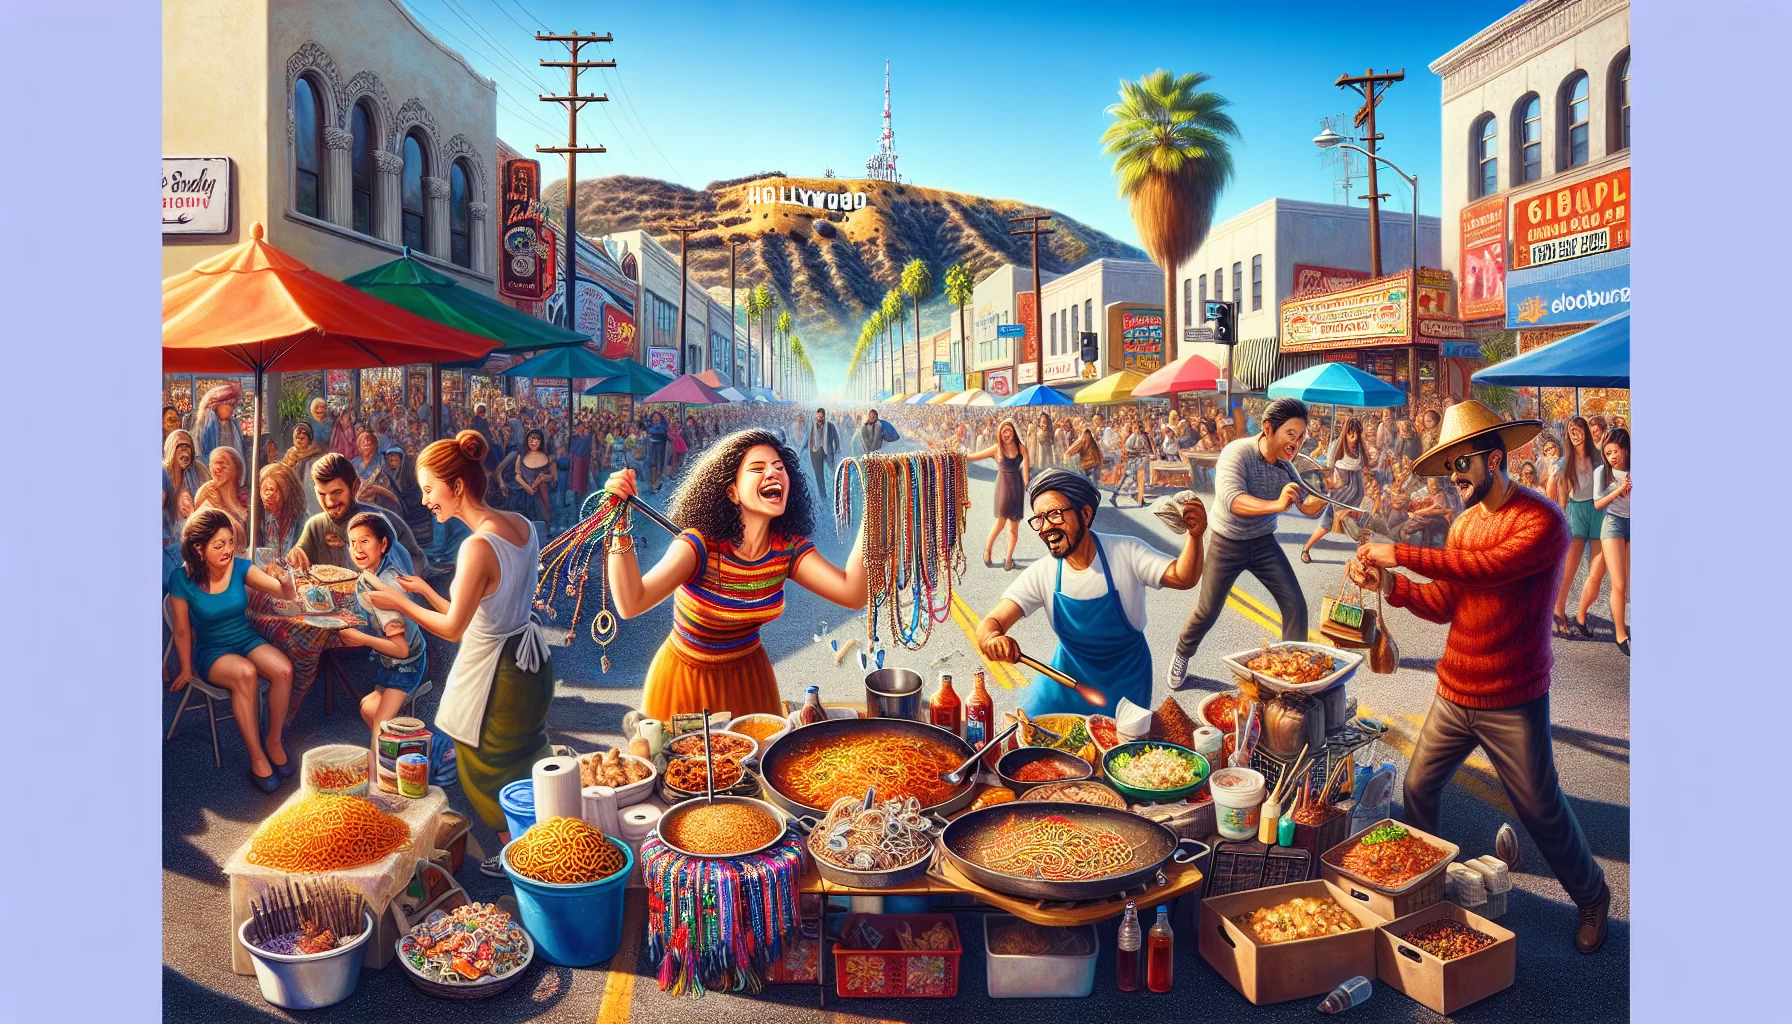 Hollywood street vendors: an unconventional journey to entrepreneurship amid challenges